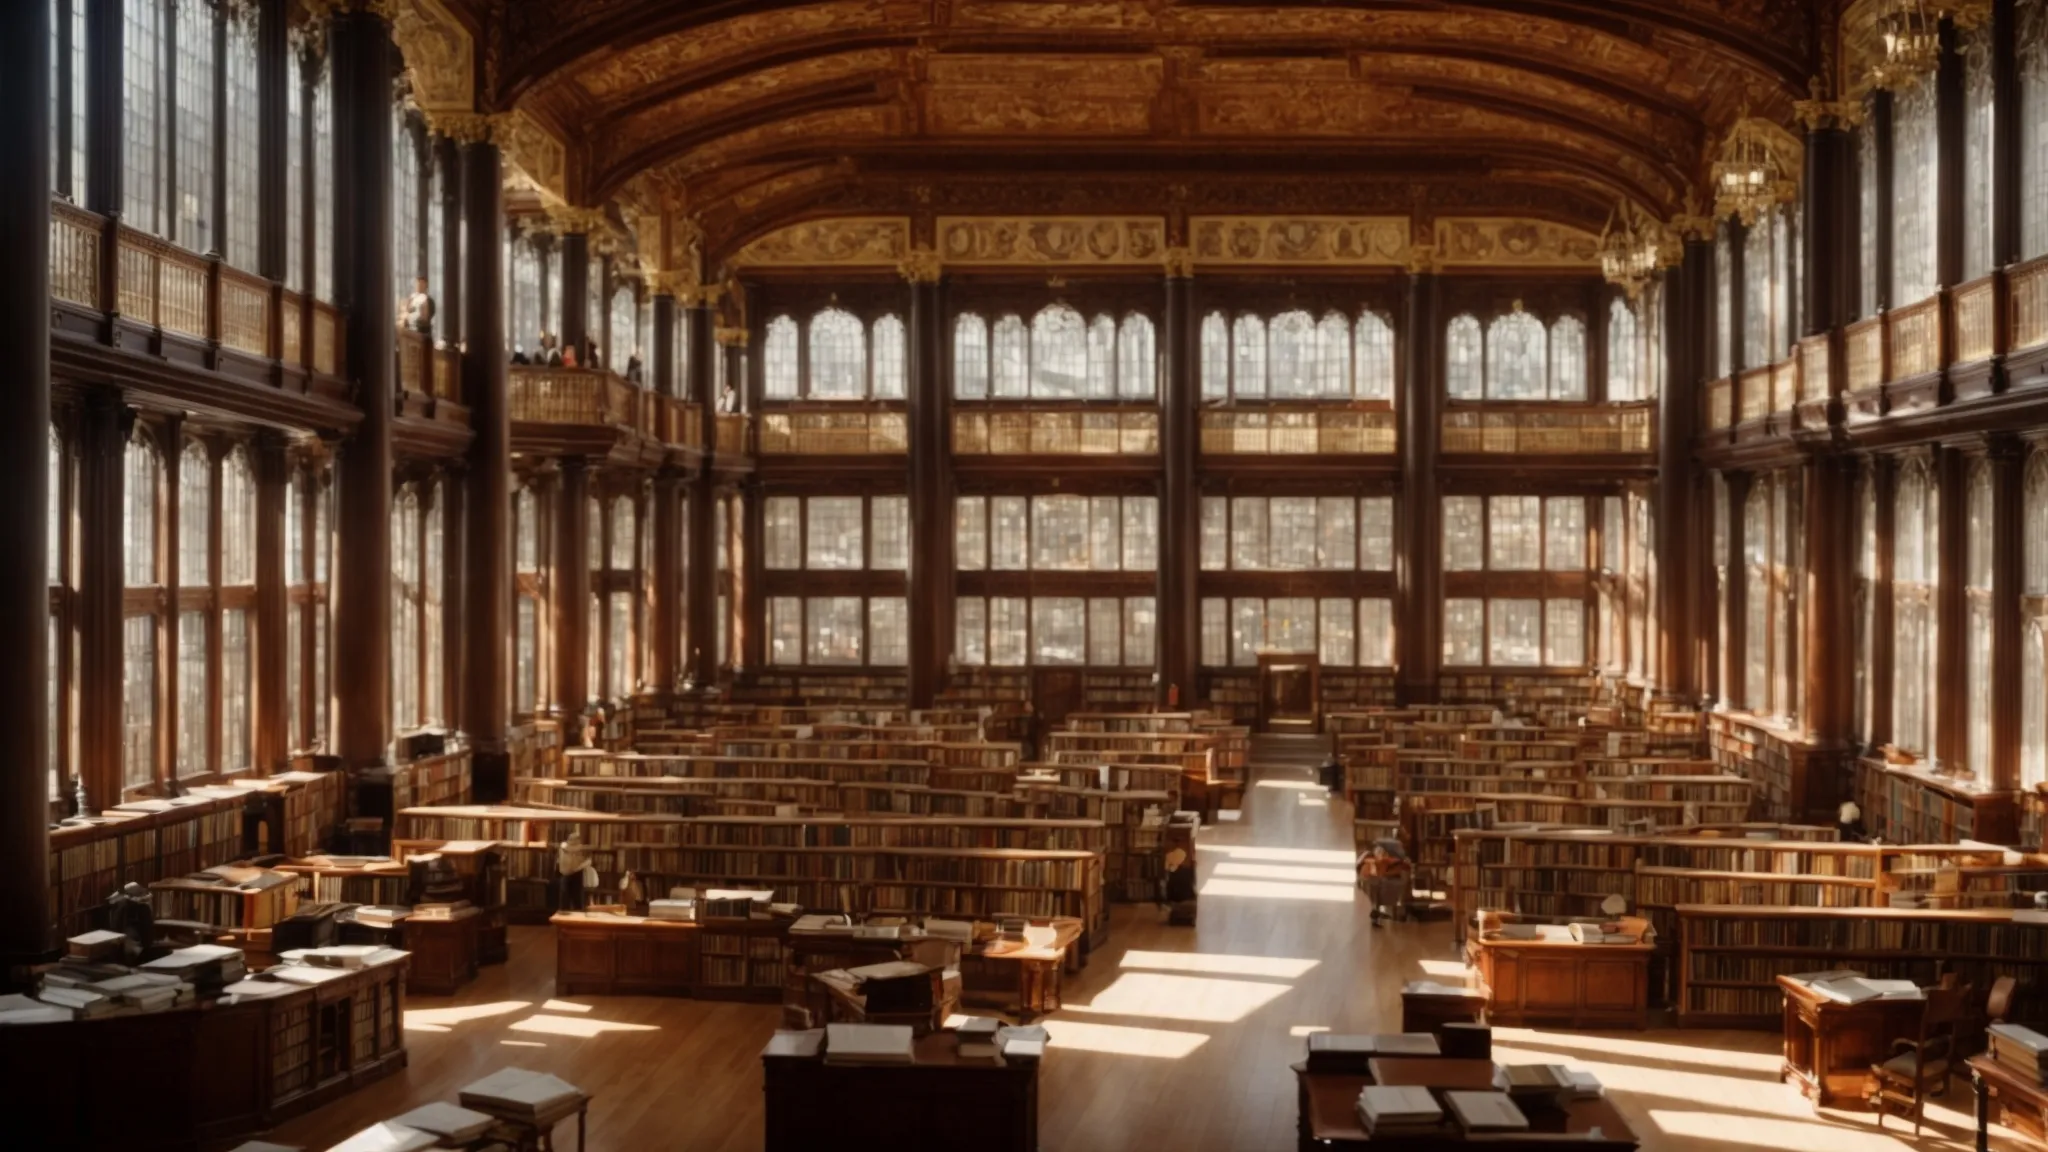 a panoramic view of a grand library with rows of books on politics, economics, law, and environmental studies illuminated by natural light filtering through large windows.